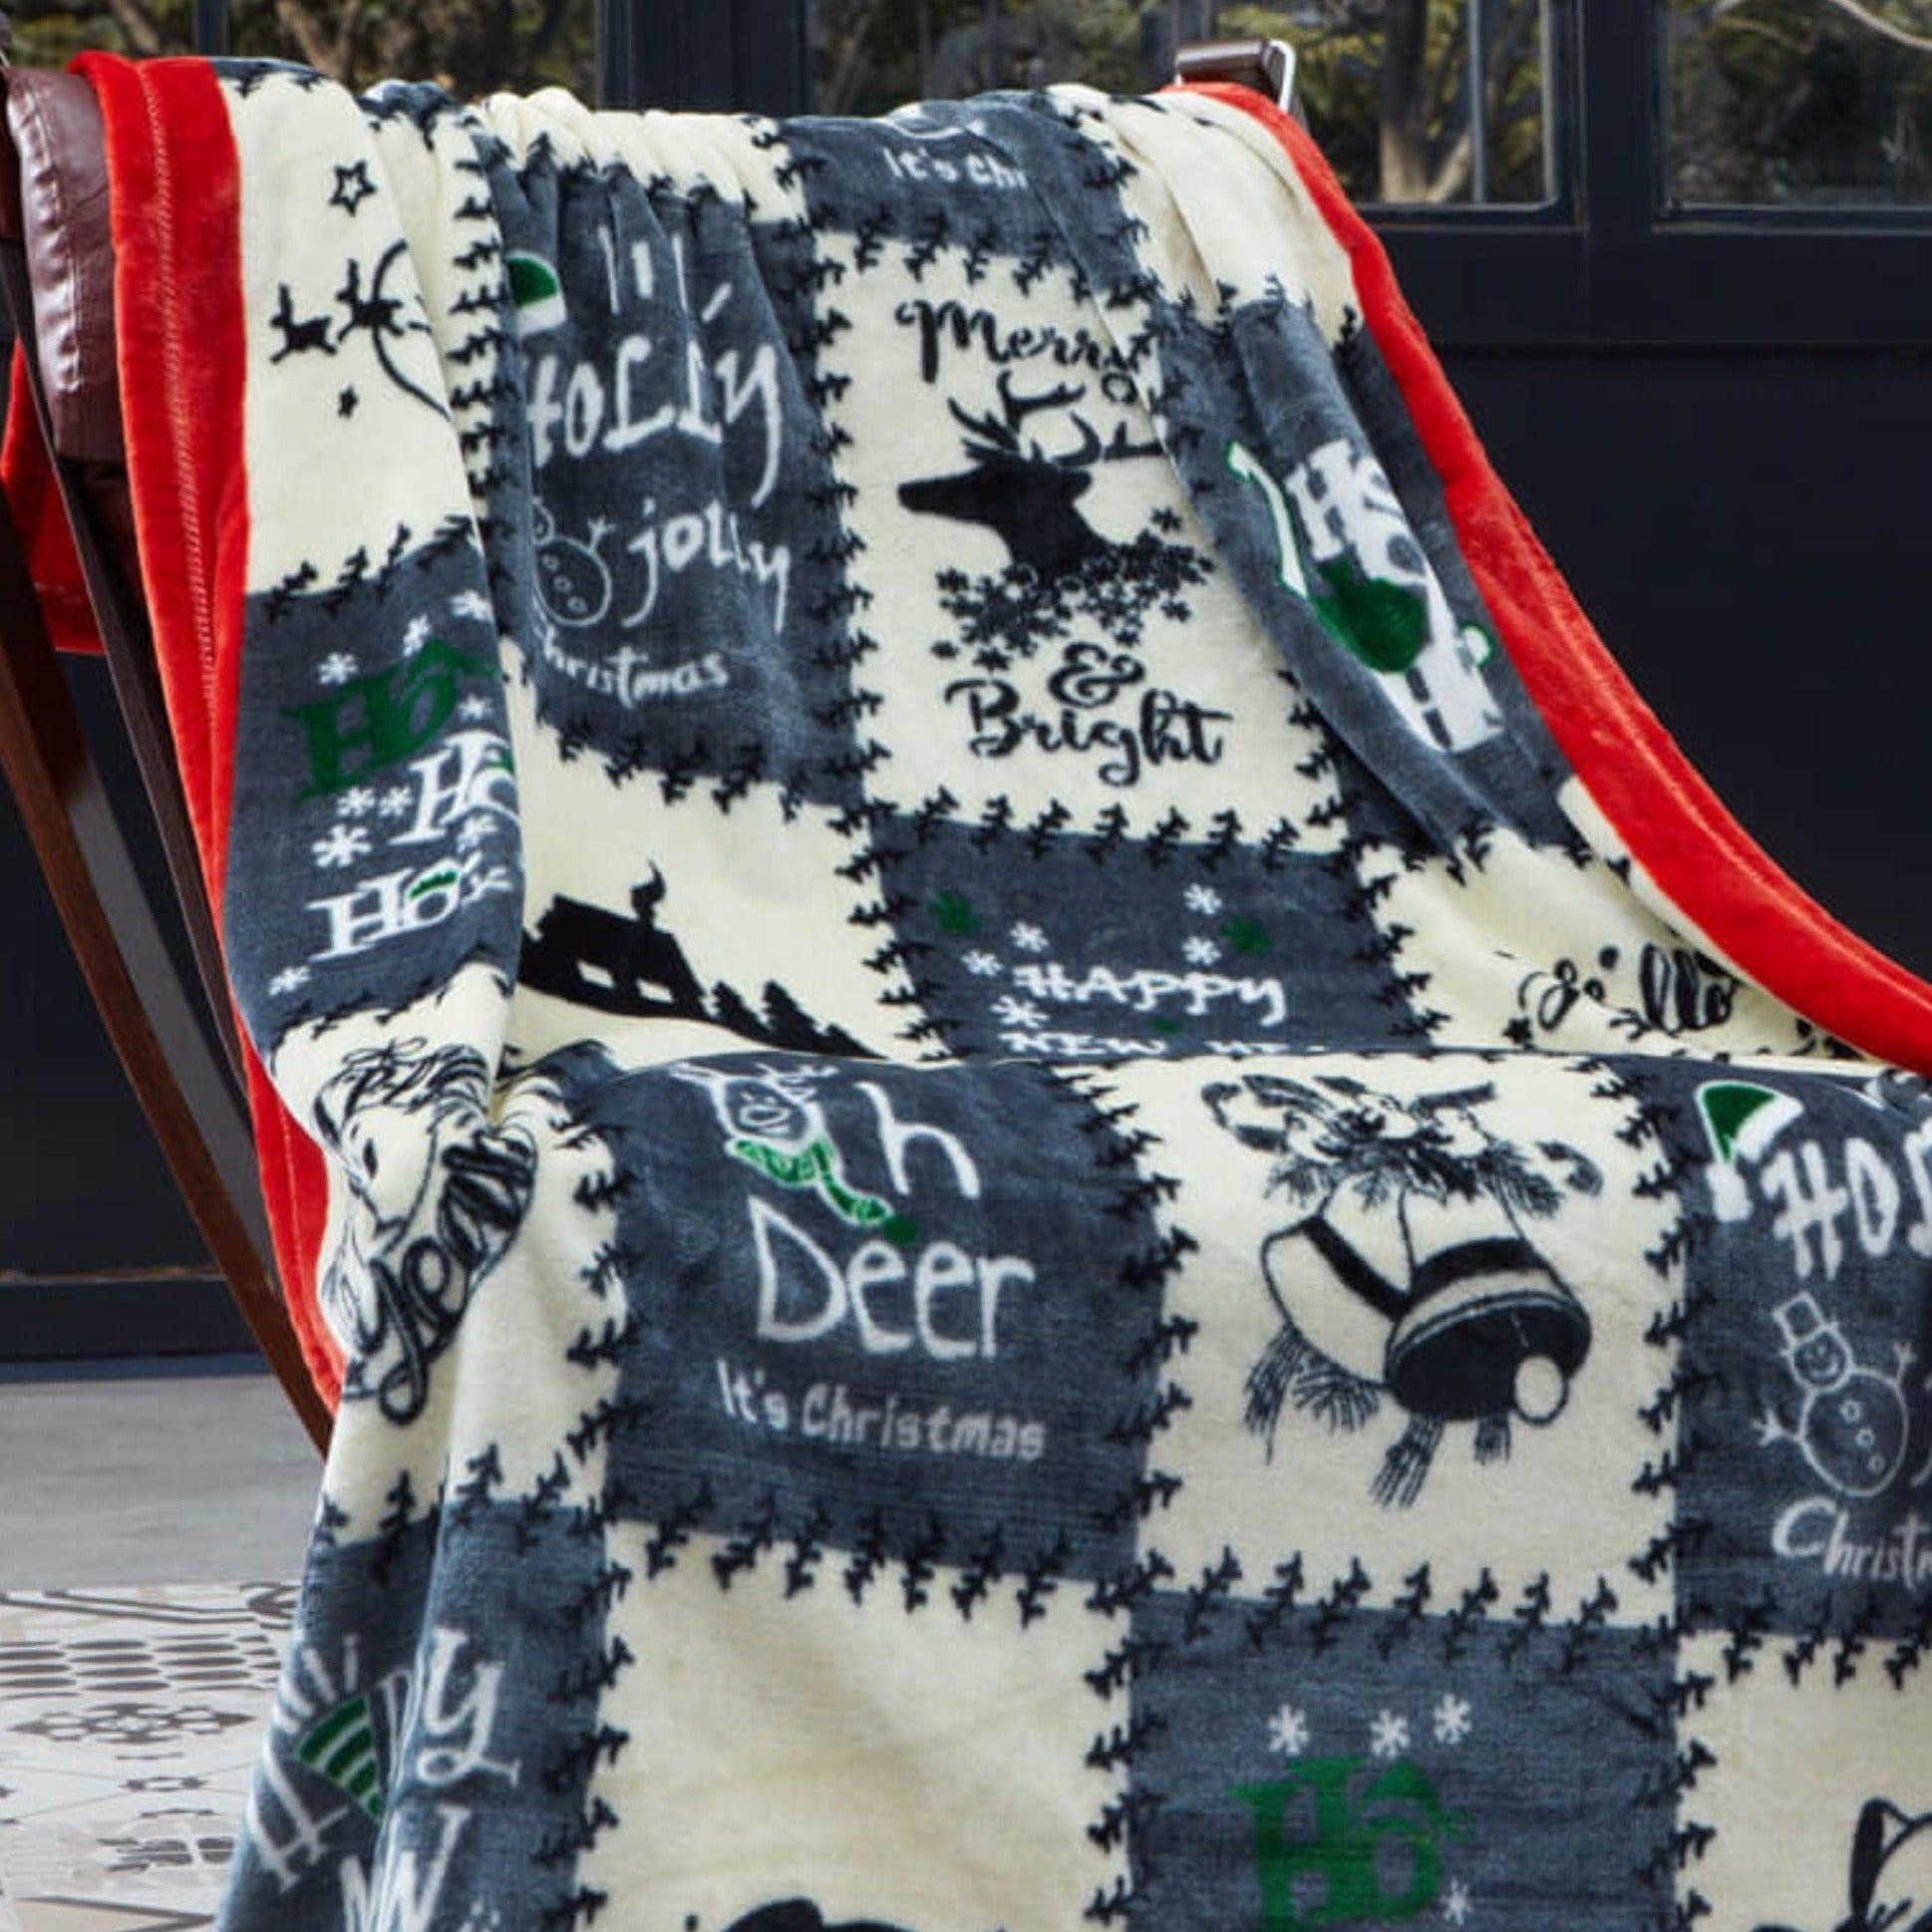 A Christmas blanket with a deer design